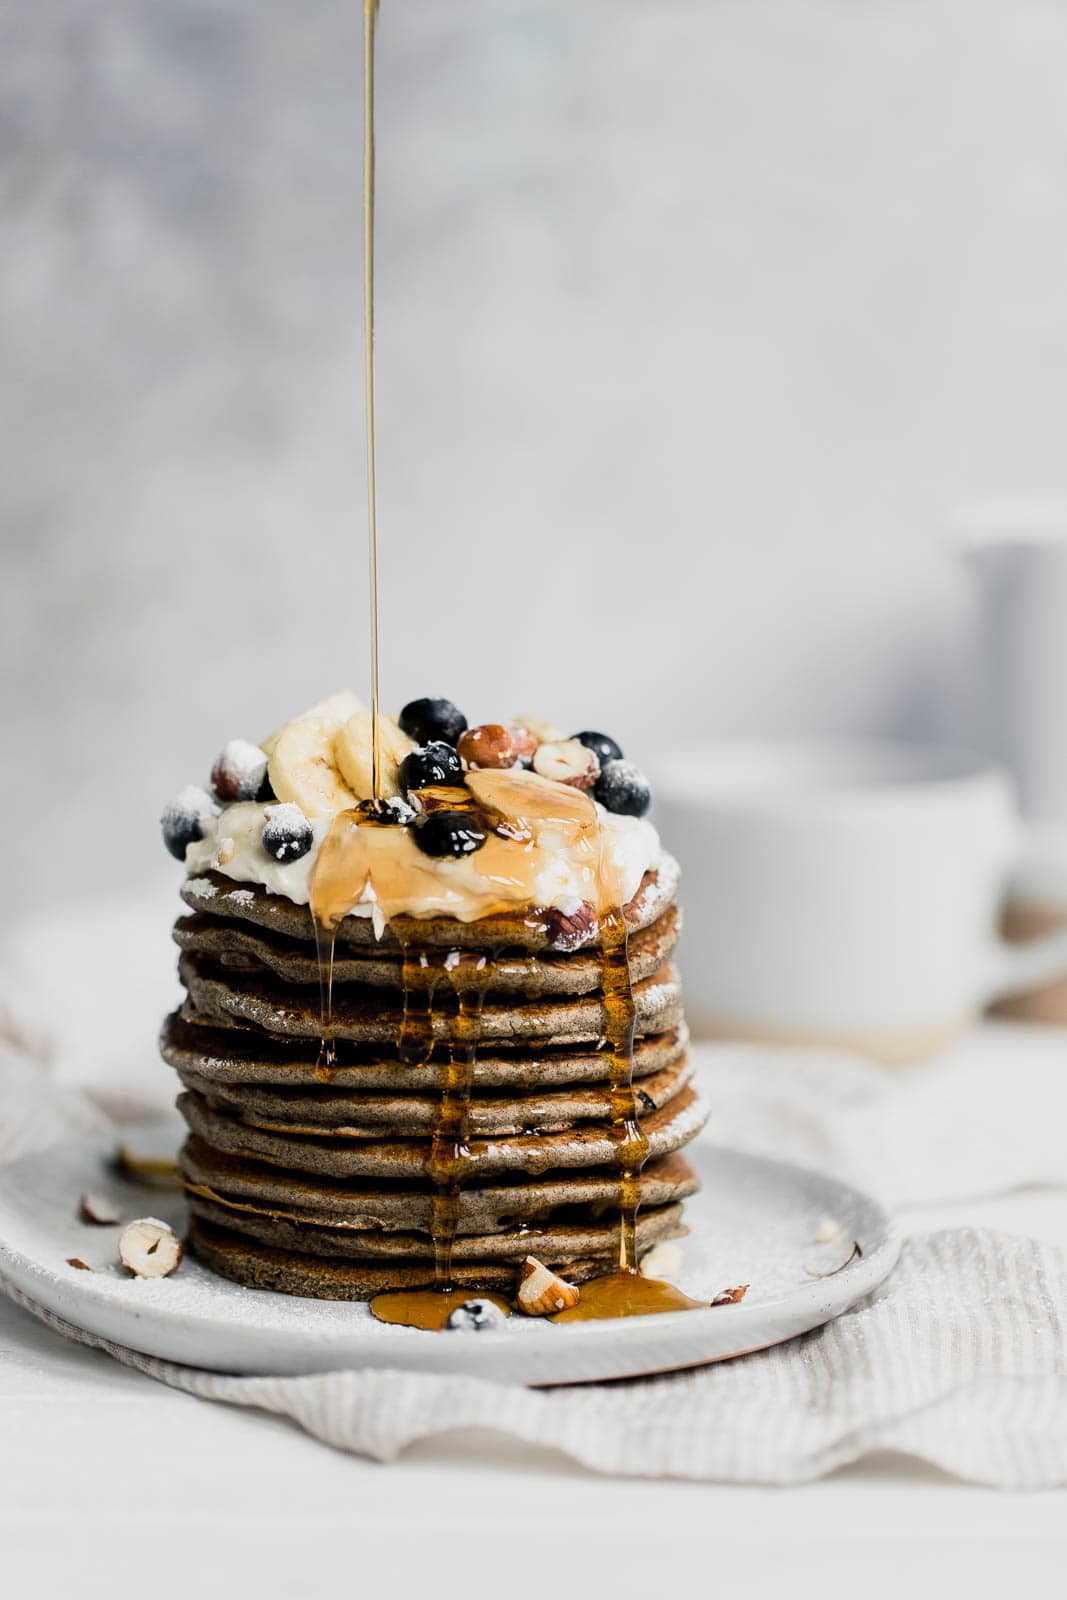 Naturally gluten-free blueberry buckwheat pancakes. Healthy and surprisingly delicious!